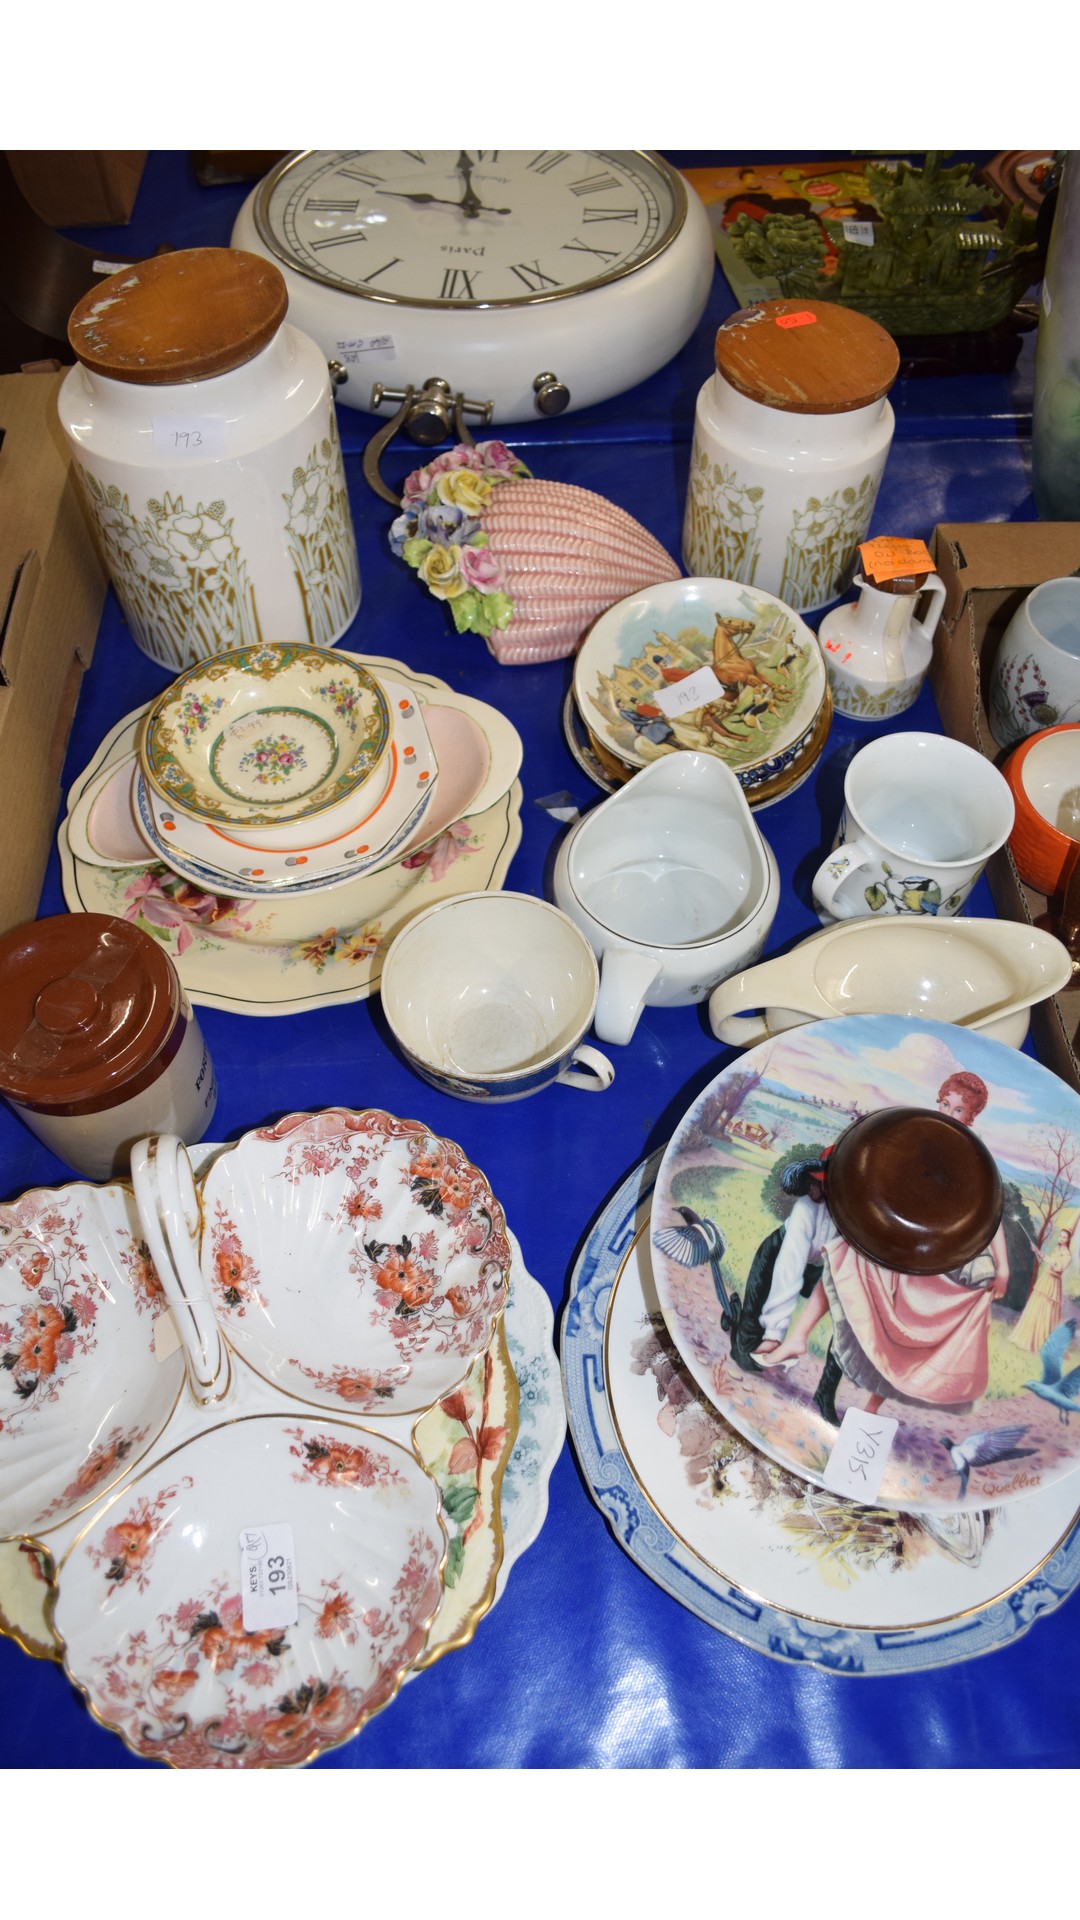 MIXED LOT OF CHINA WARES TO INCLUDE SILVAC WALL POCKET, HORNSEA STORAGE JARS, EDWARDIAN HORS D'